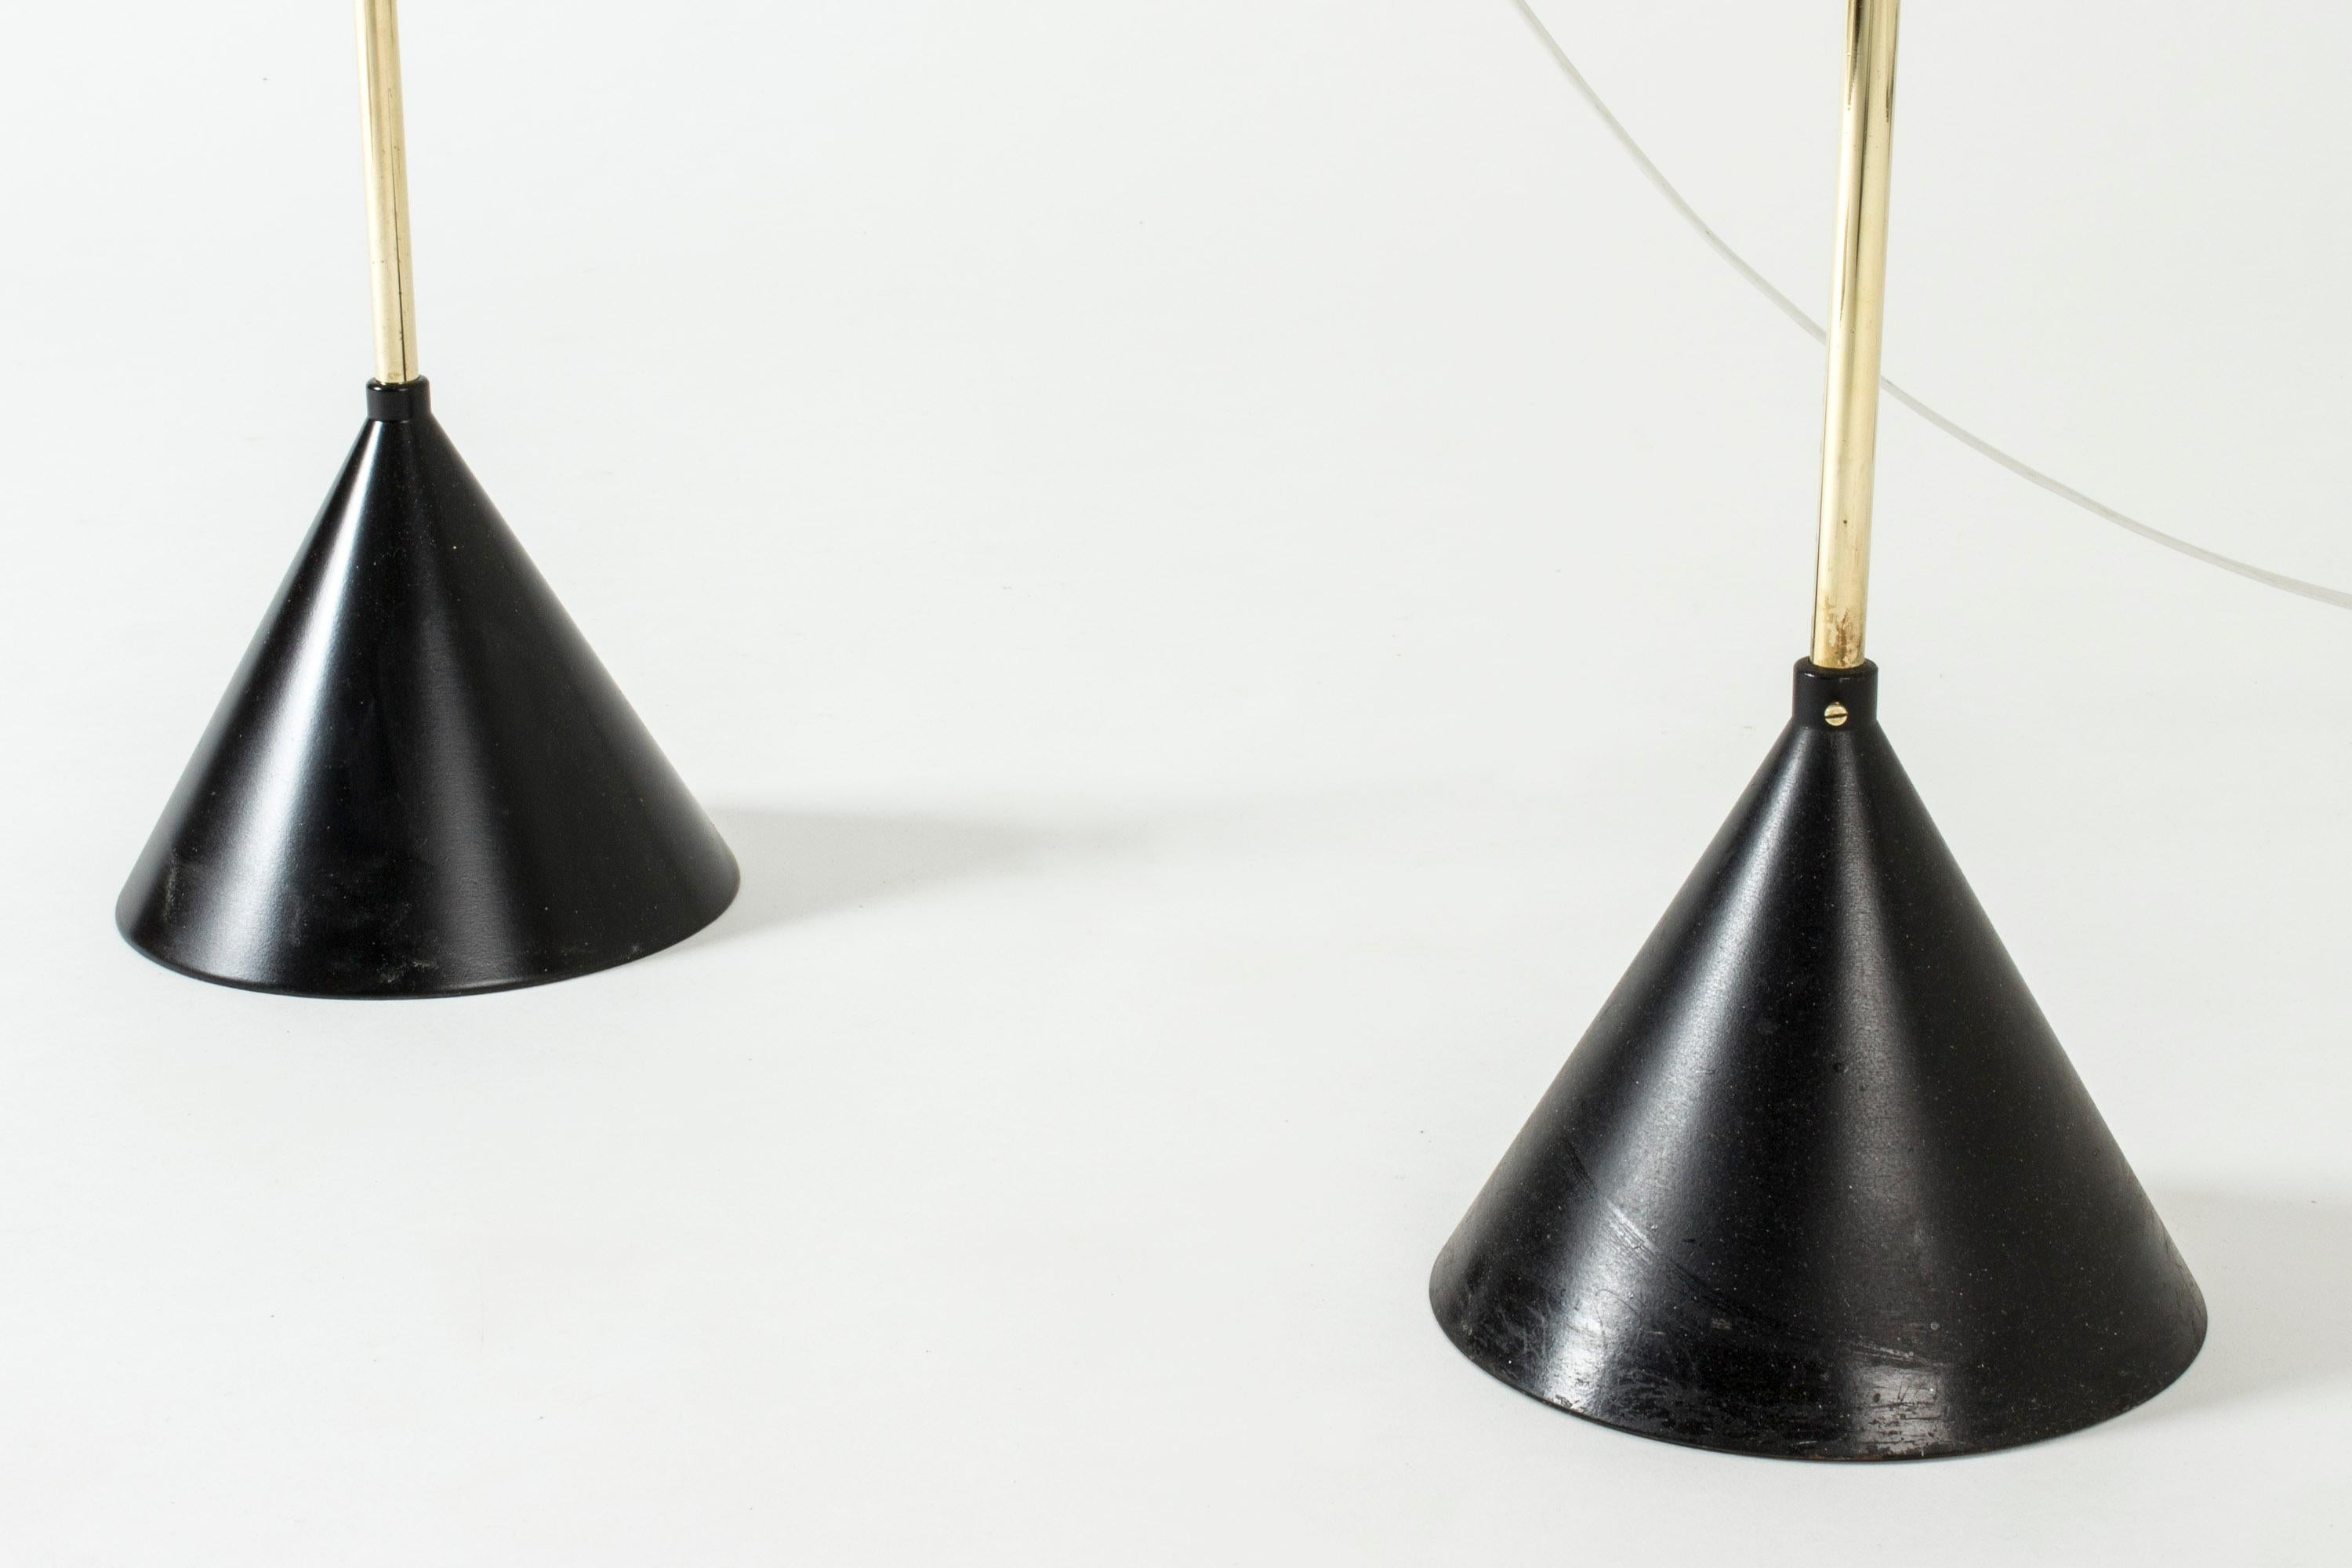 Mid-20th Century Pair of Lacquered Metal and Brass Floor Lamps by Tapio Wirkkala for Idman Oy